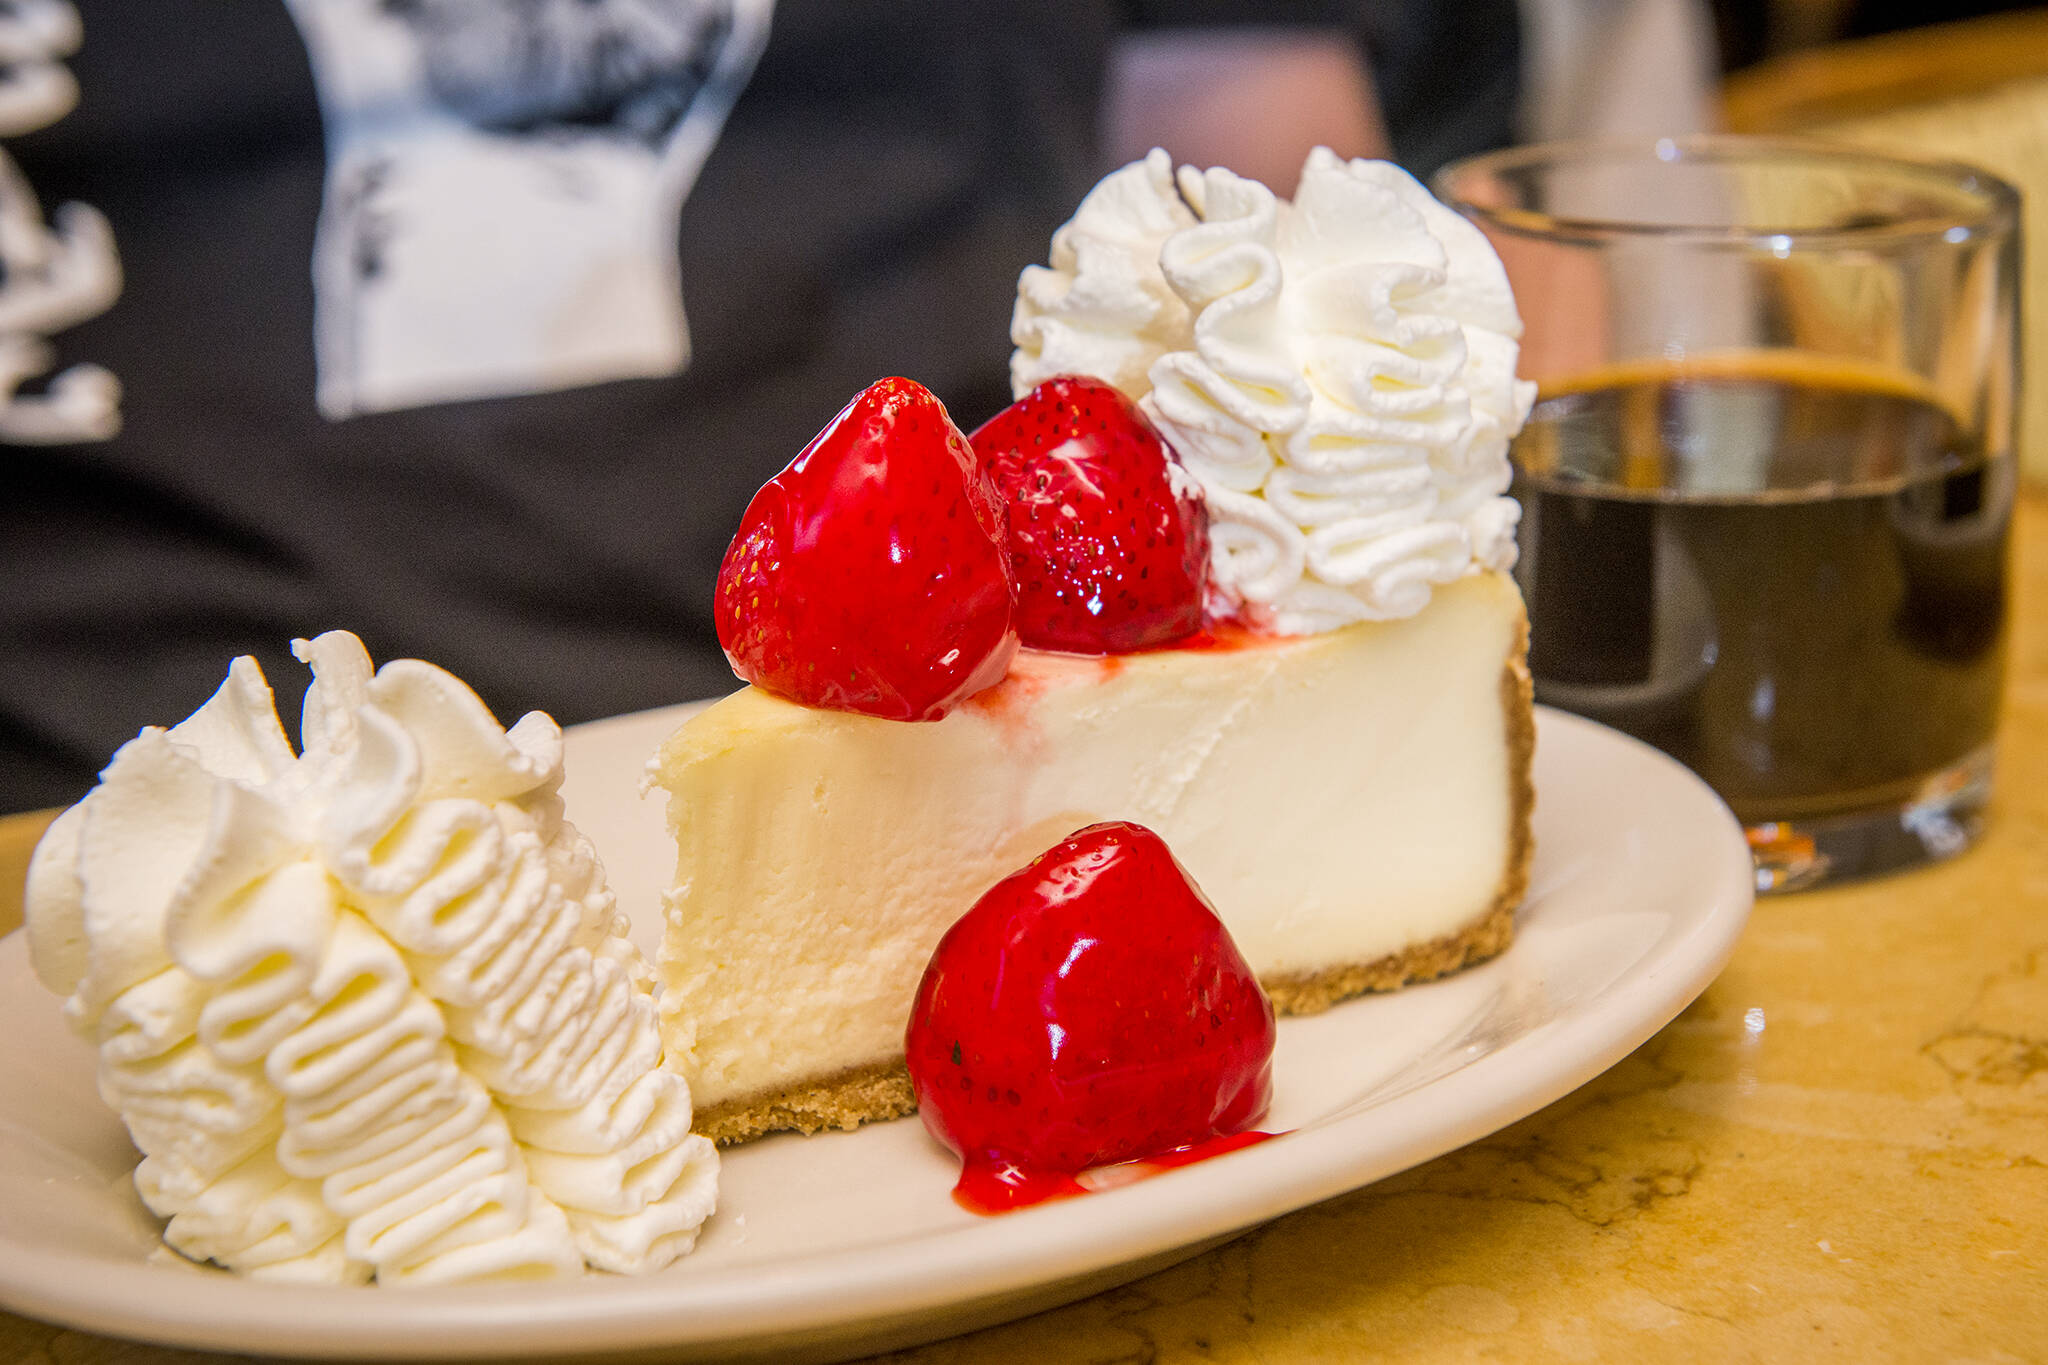 Cheesecake Factory might open another location in Mississauga